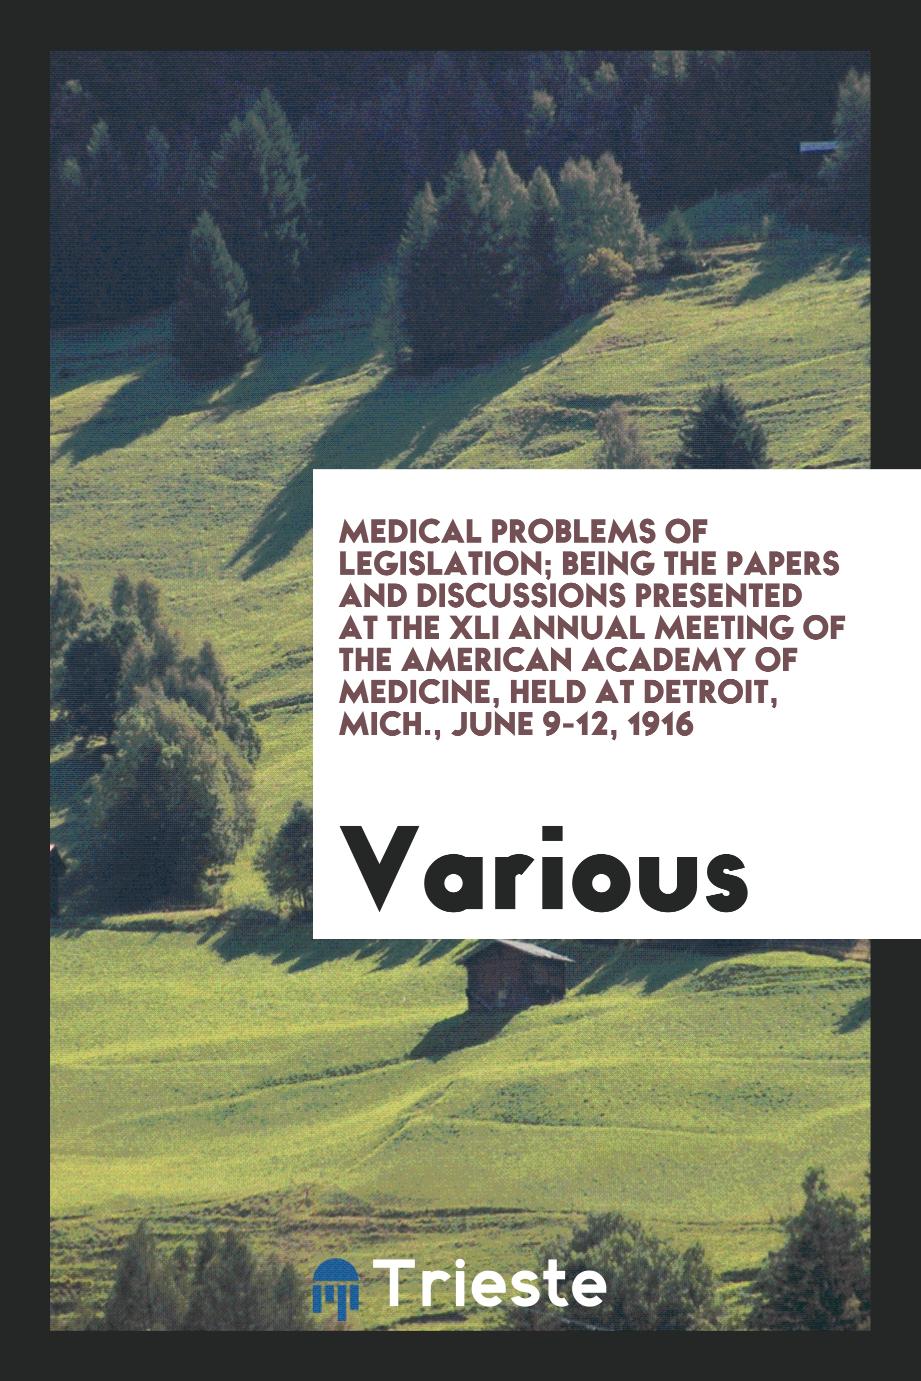 Medical problems of legislation; being the papers and discussions presented at the XLI annual meeting of the American Academy of Medicine, held at Detroit, Mich., June 9-12, 1916